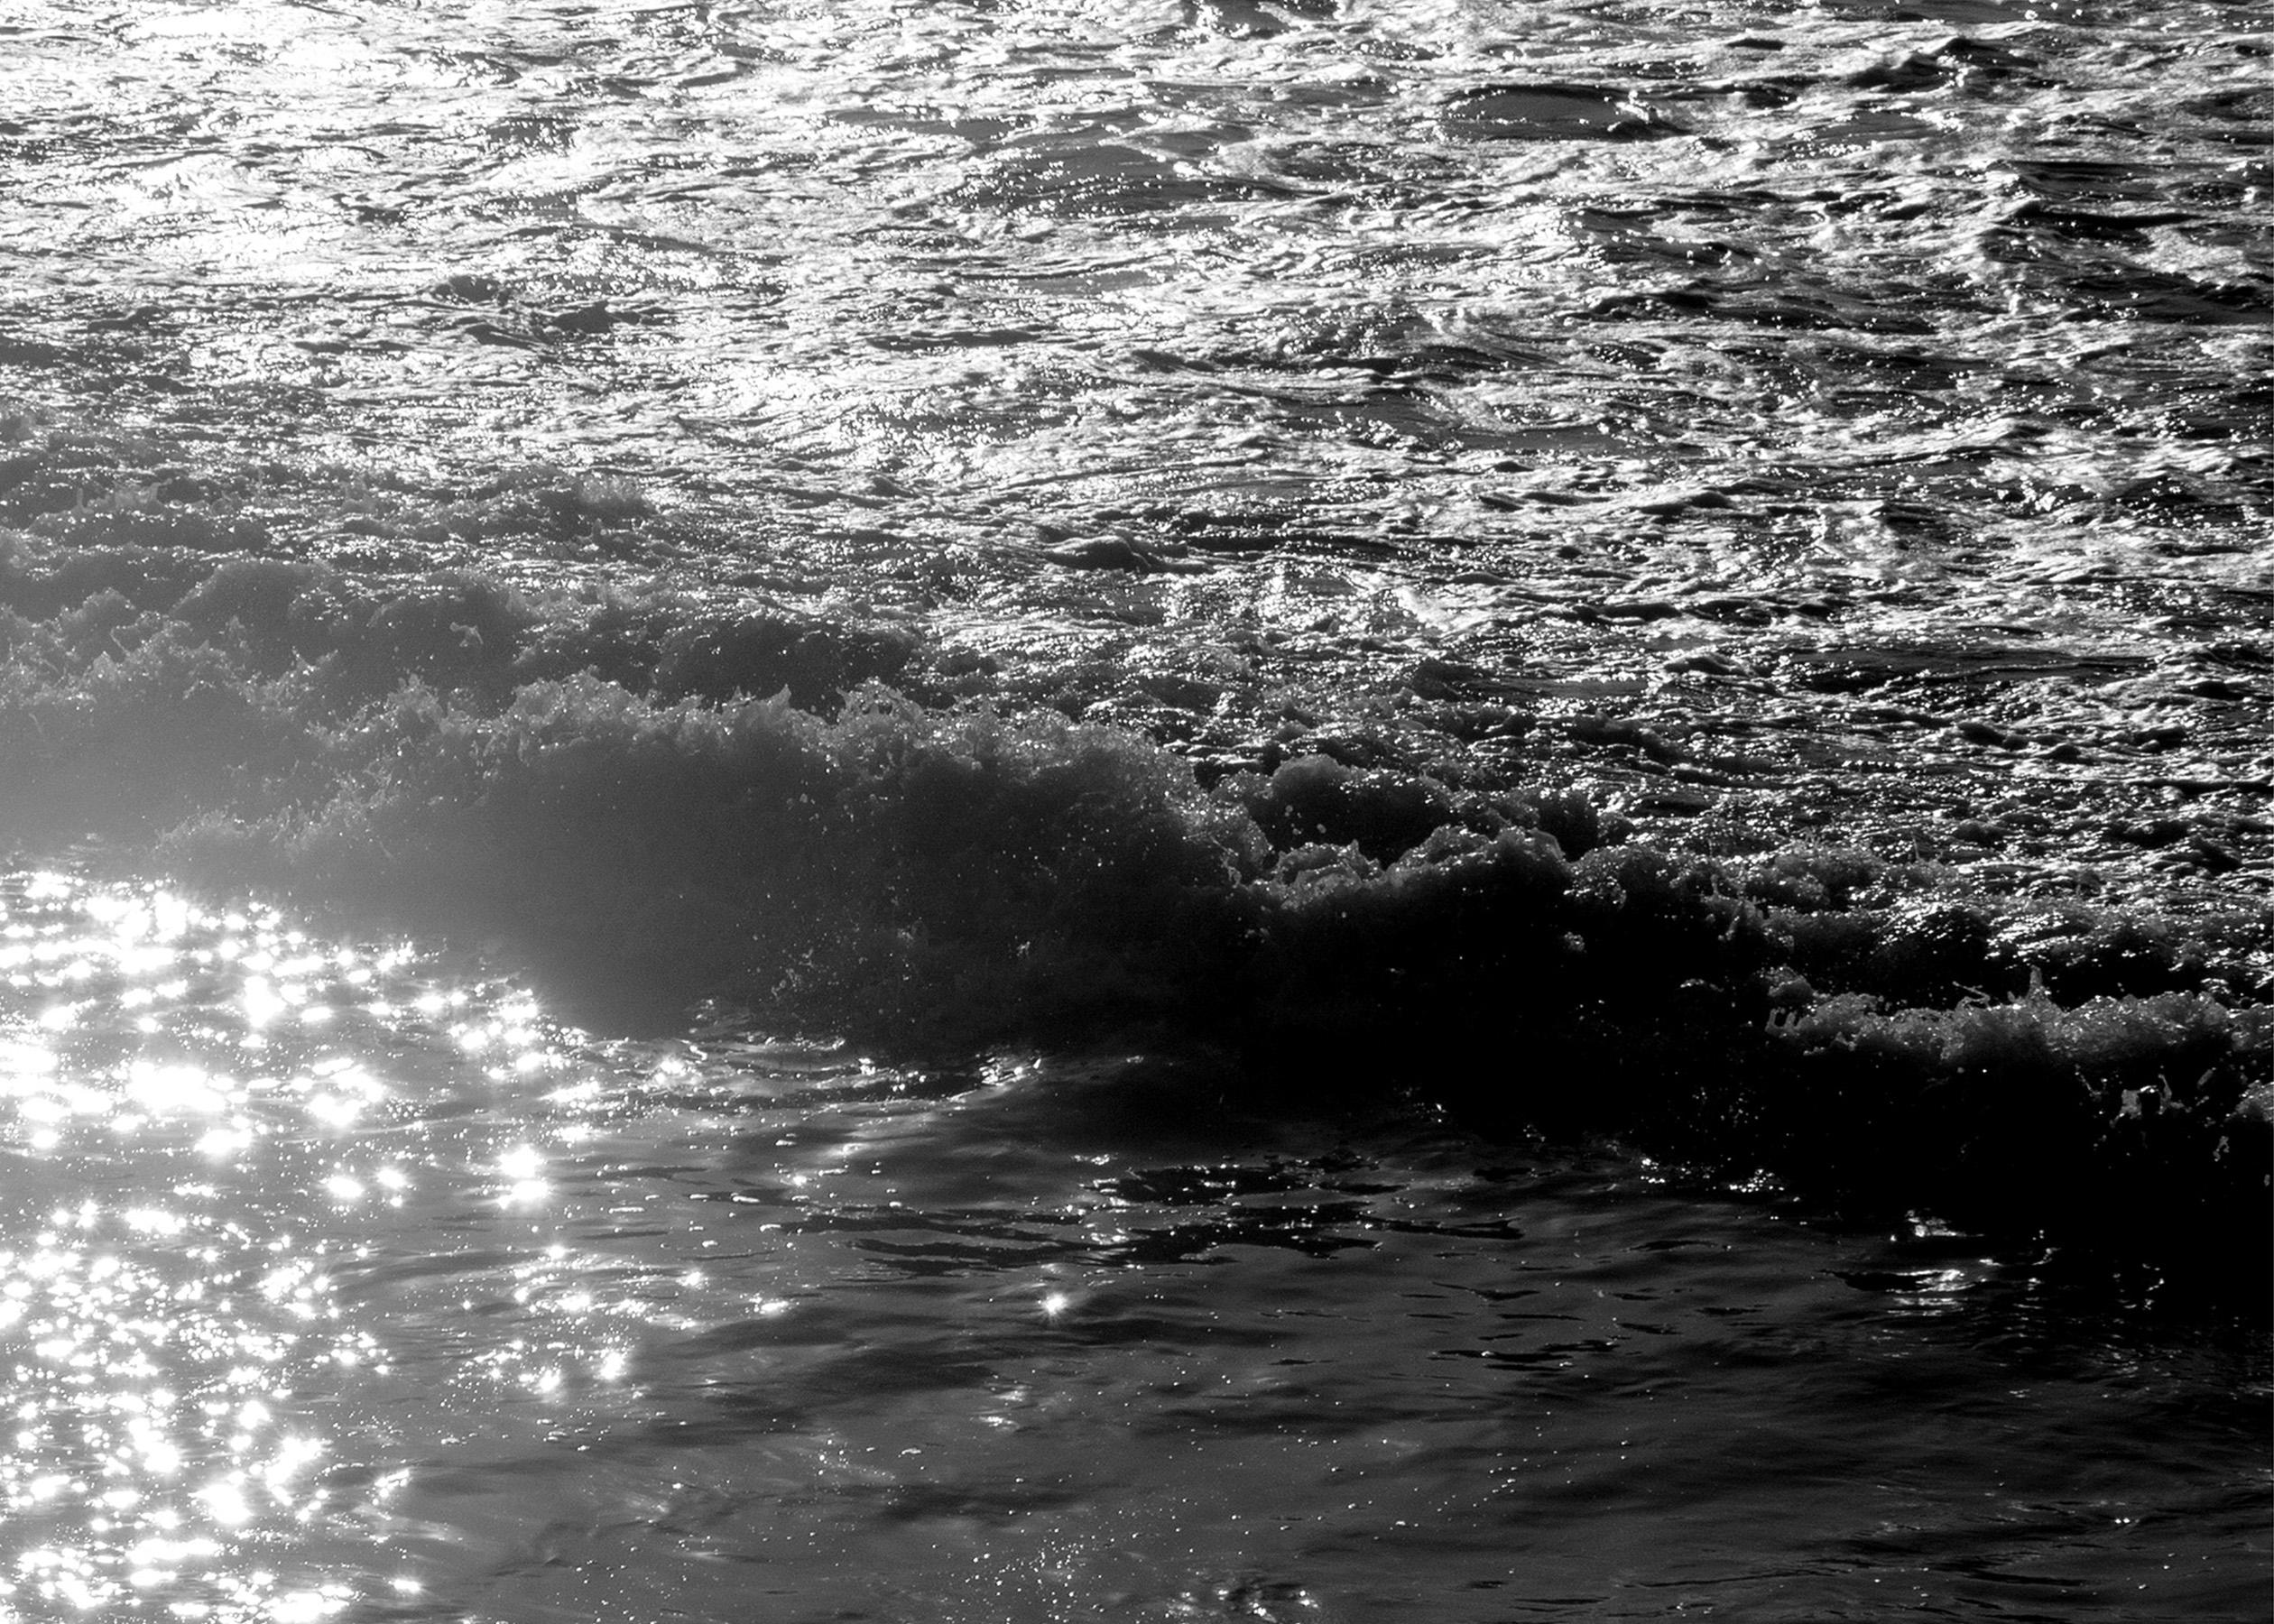 Water Reflection, Seascape Black and White Giclée Print, Pacific Sunset Waves 1